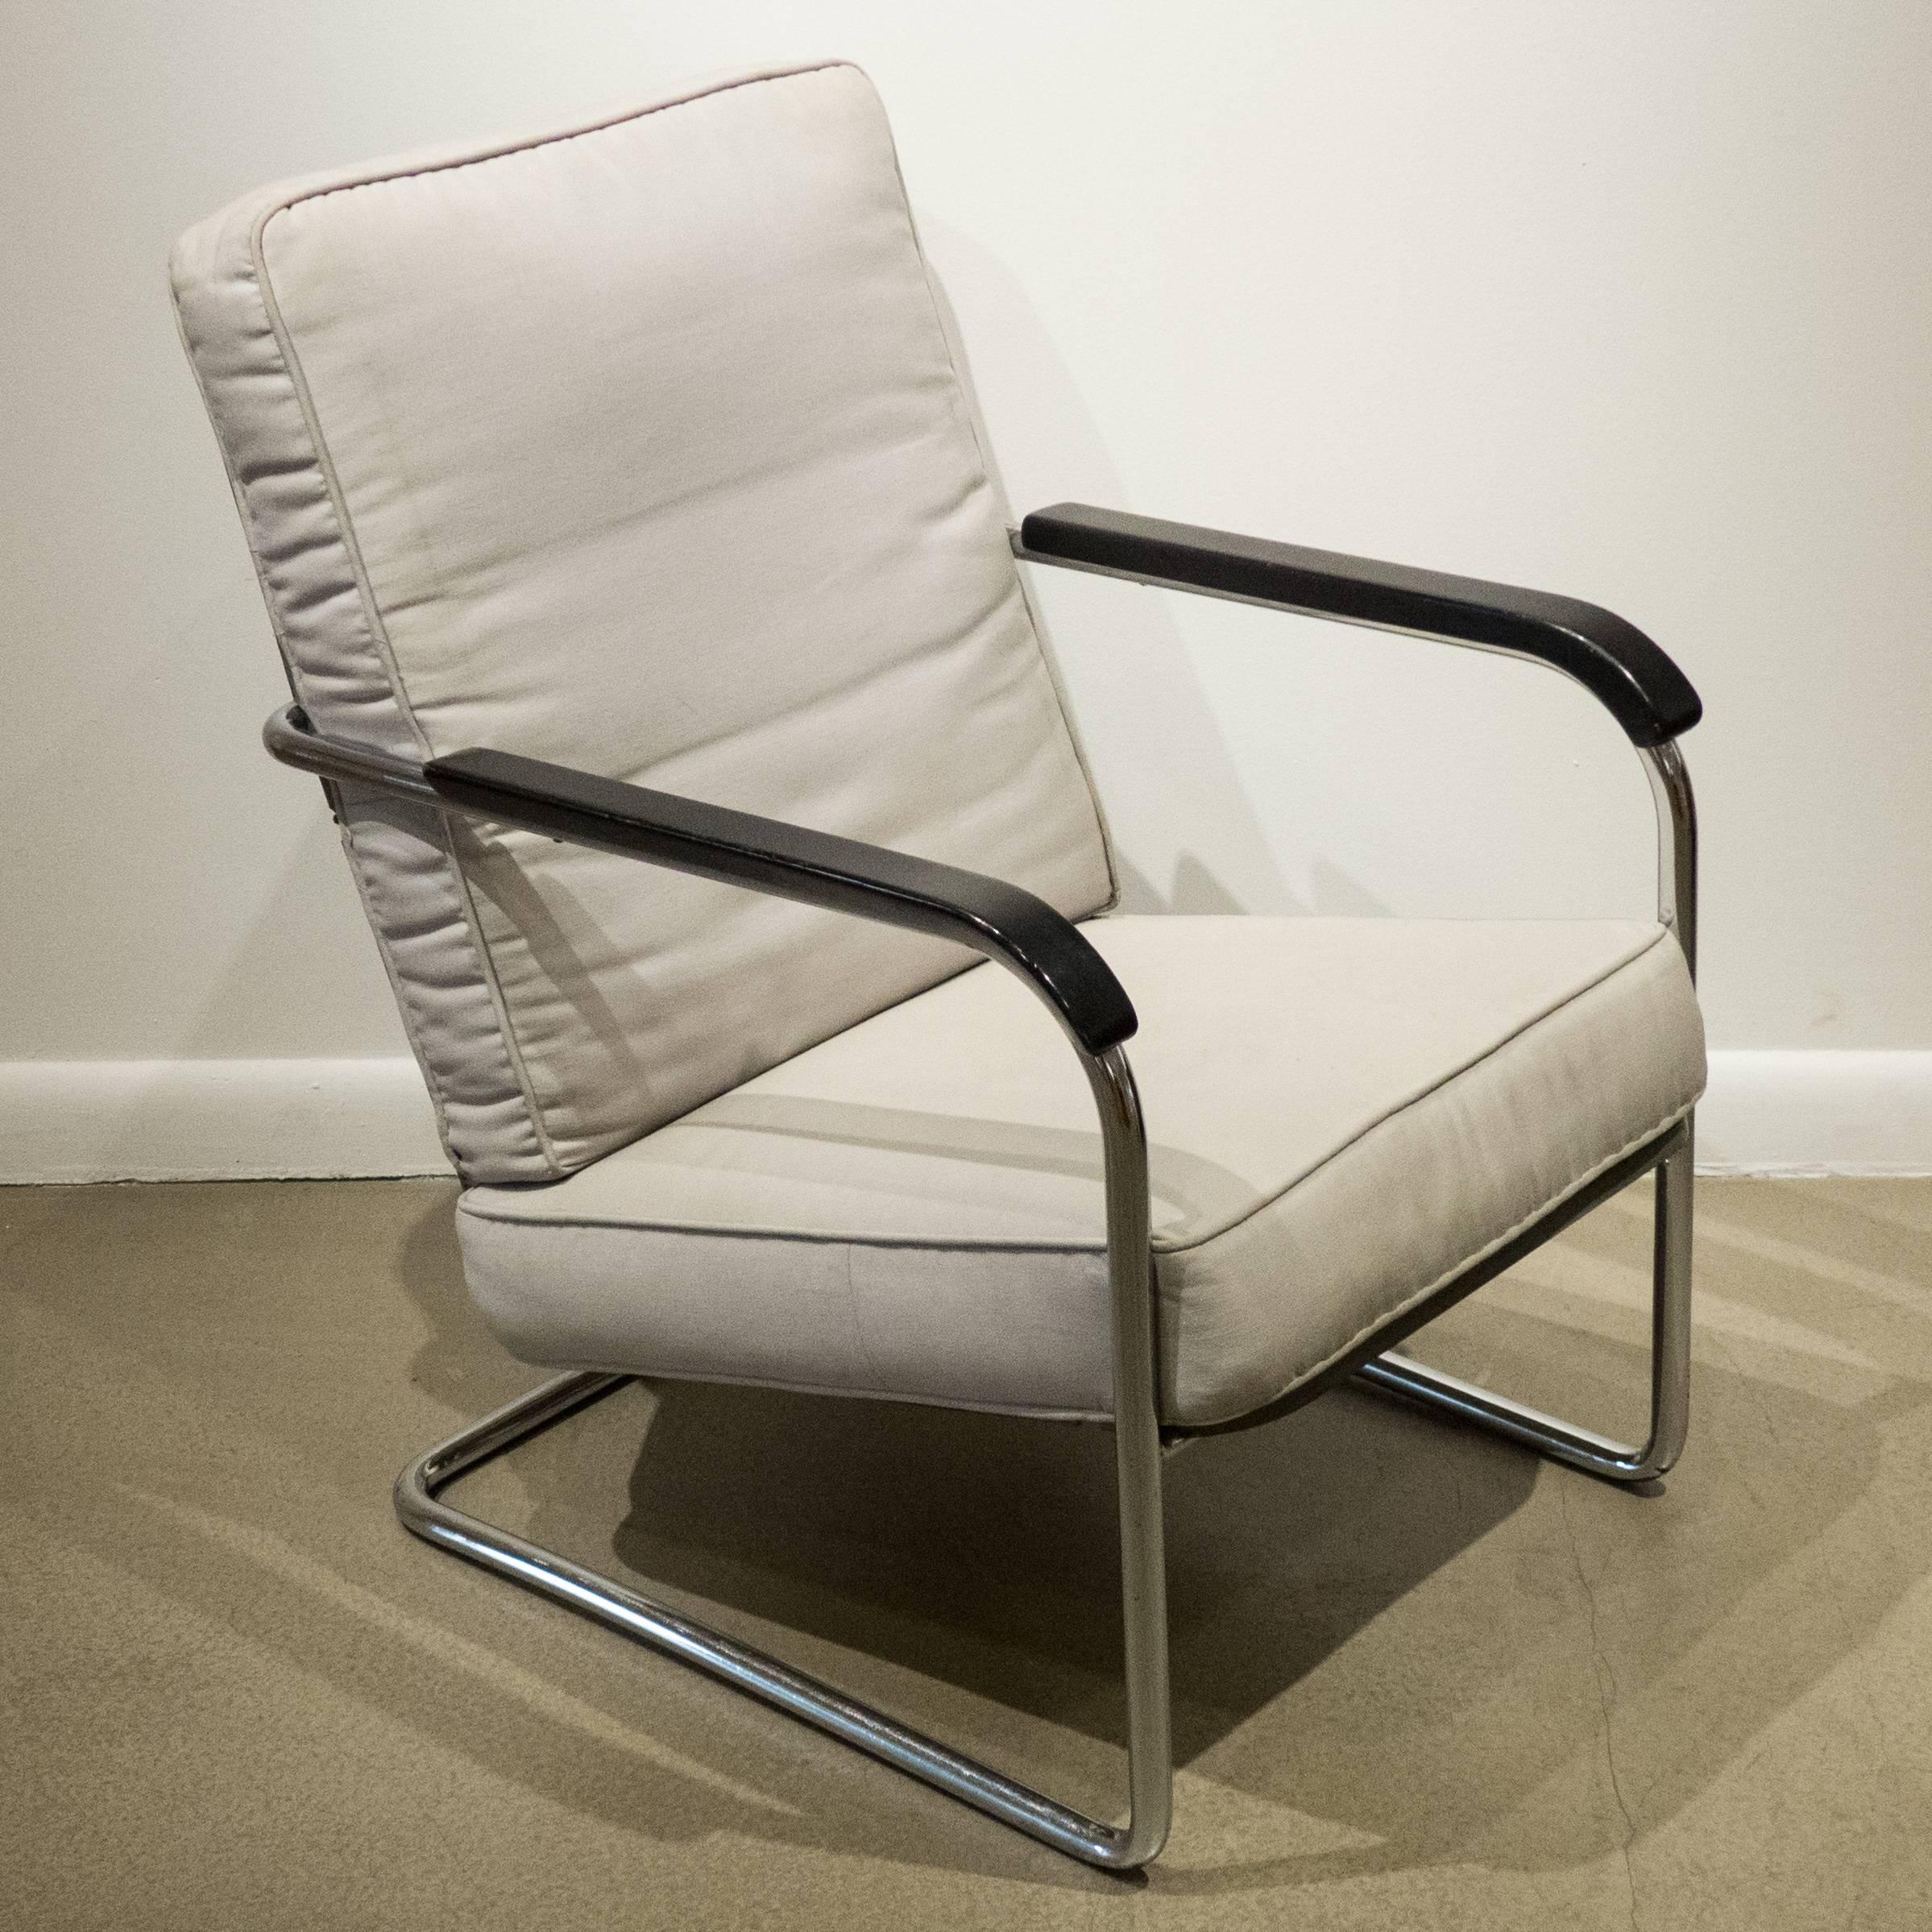 High-back armchair with a cantilevered tubular chrome frame with gray-painted flat and angled steel seat and back and steel coils and painted wooden armrests. Designed by Werner Max Moser and produced by Embru Werke/Wohnbedarf, circa 1934. The loose